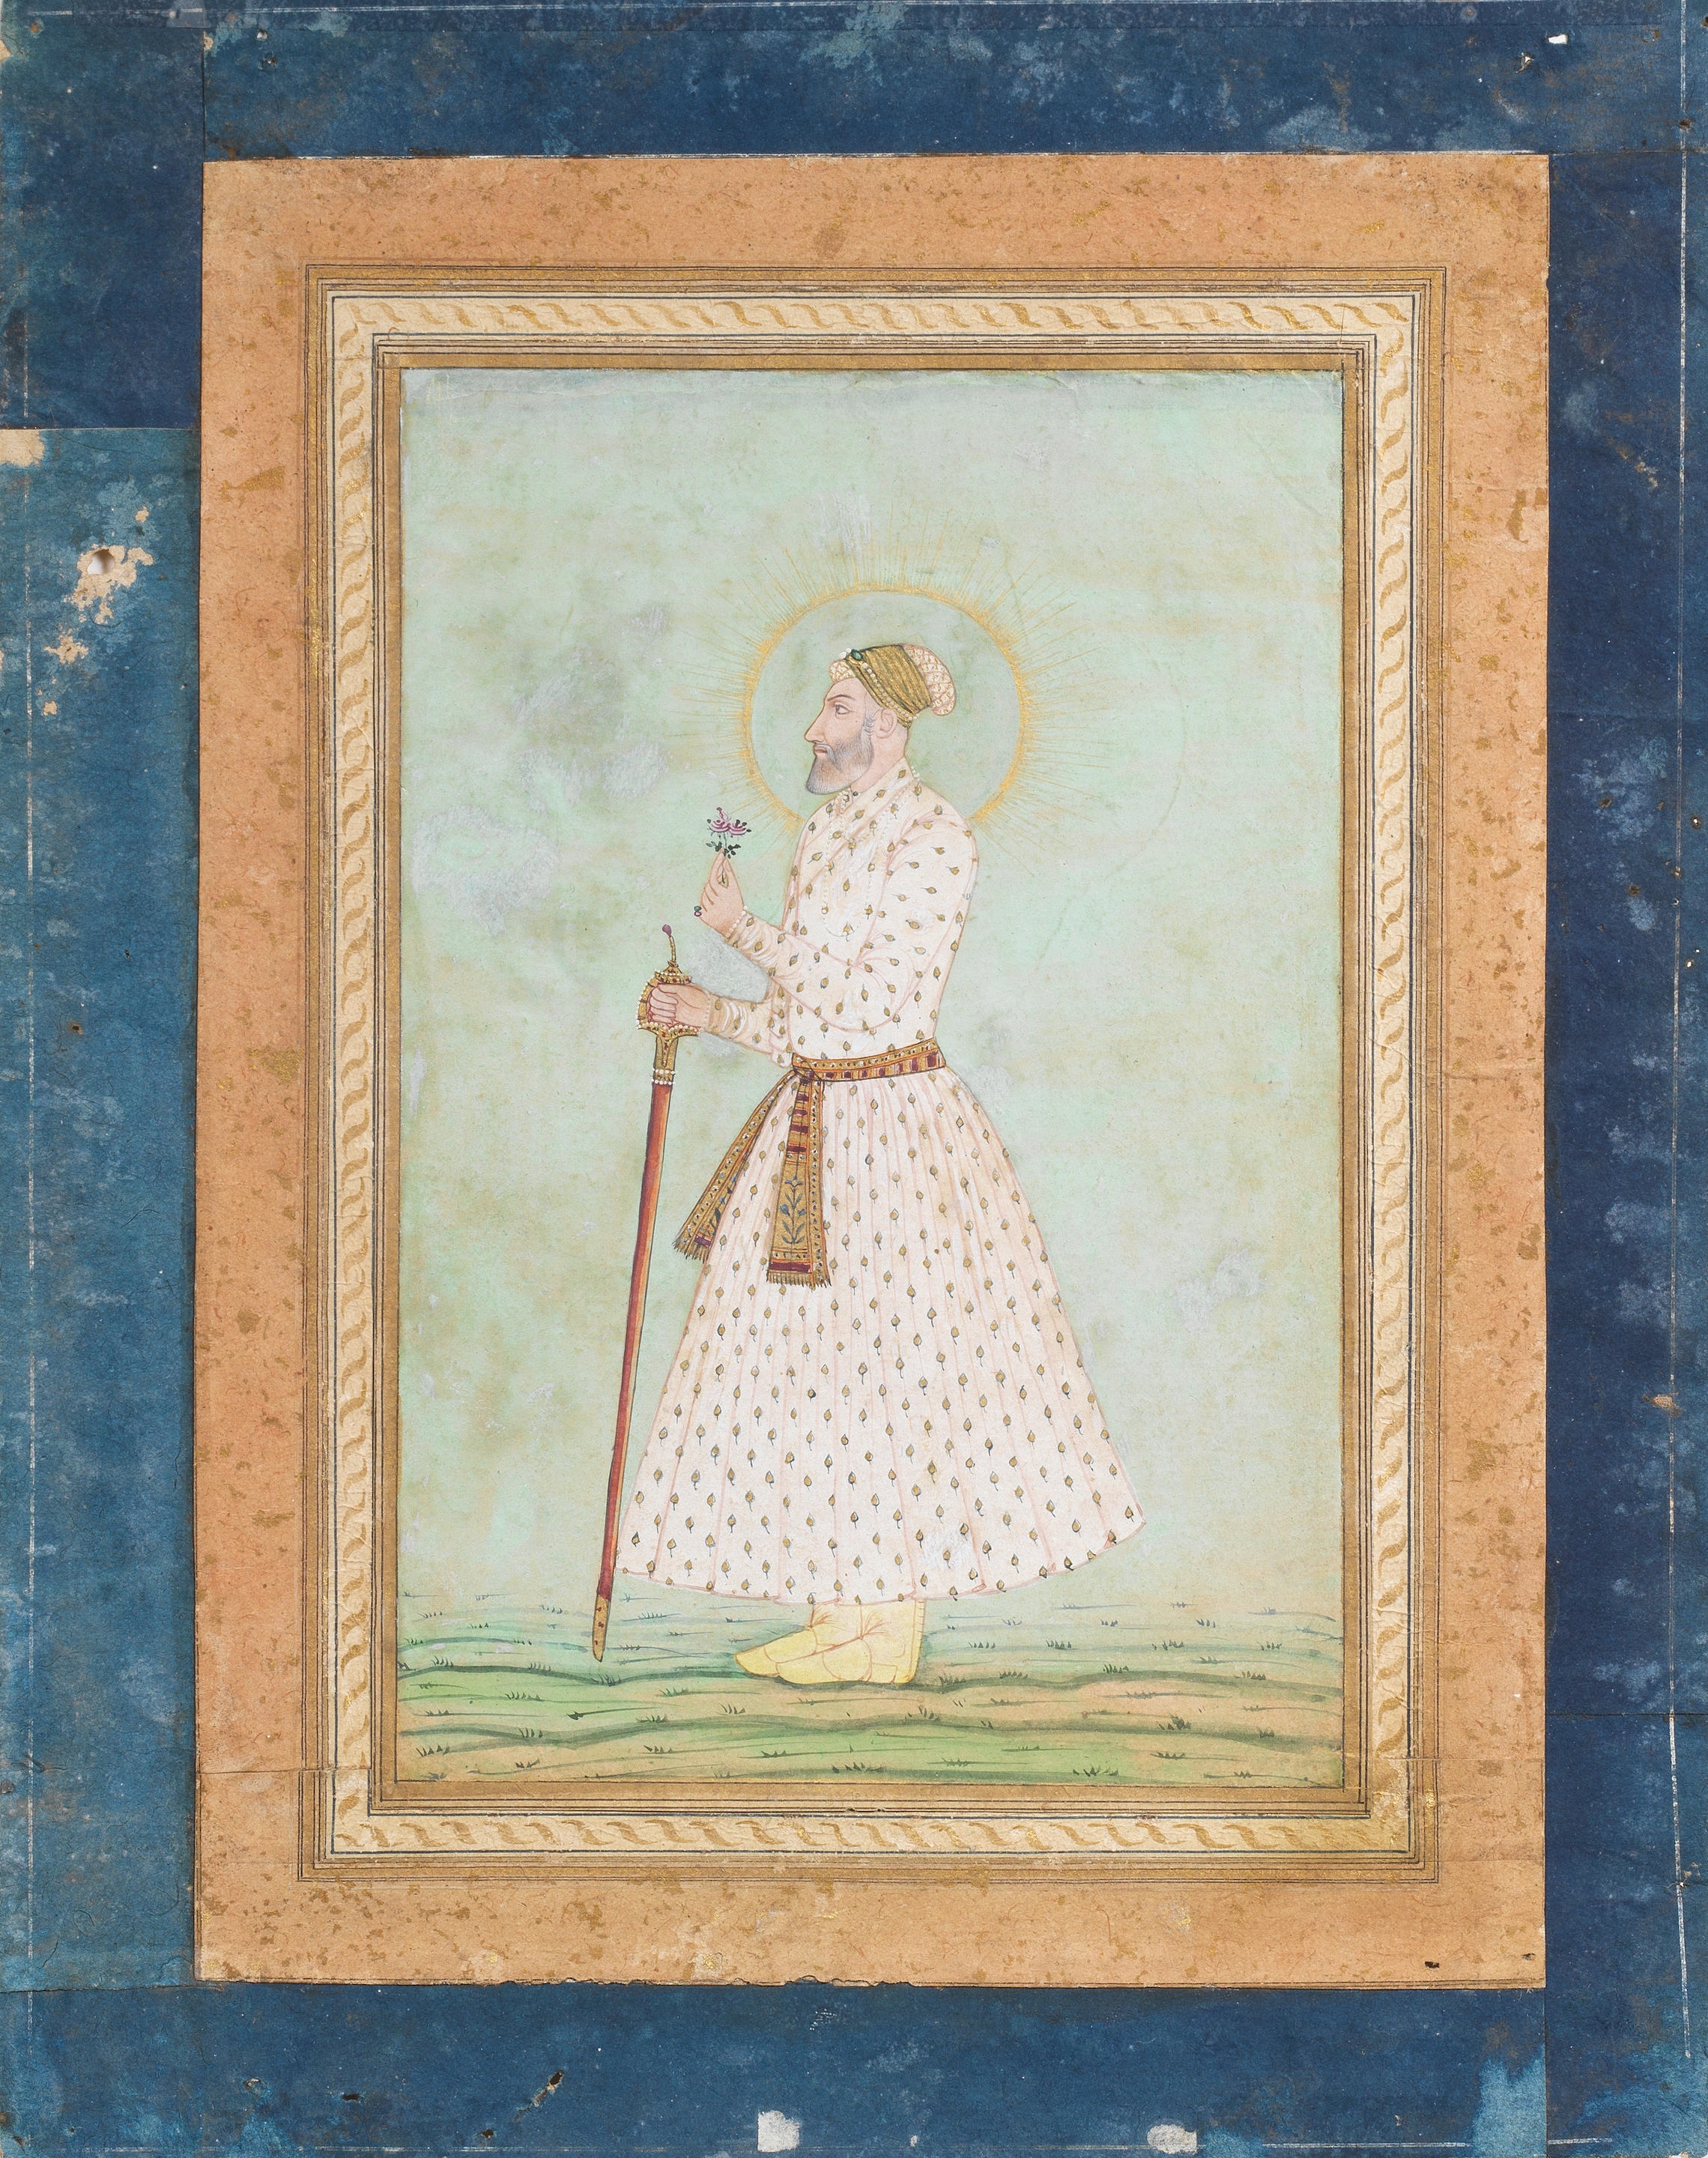 A nobleman standing in a landscape, holding a sword and a flower by Mughal School, 18th Century, late 17th/18th Century